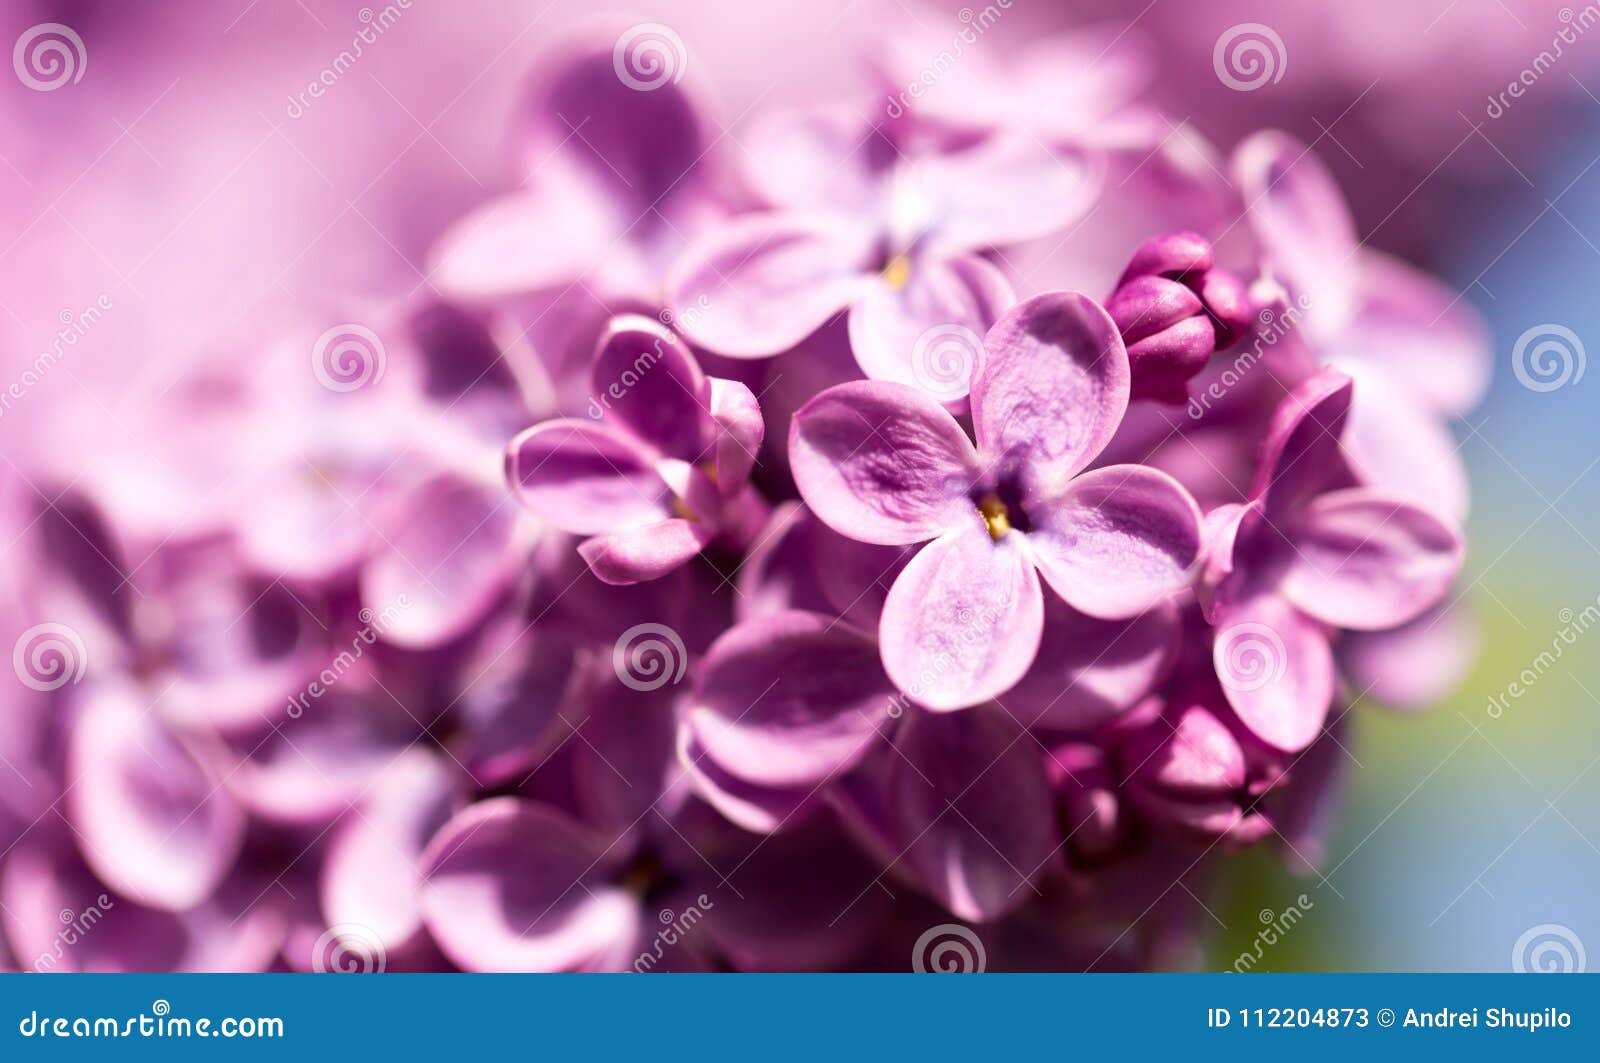 Lilac Flowers on a Tree in Spring Stock Image - Image of bunch, botany ...